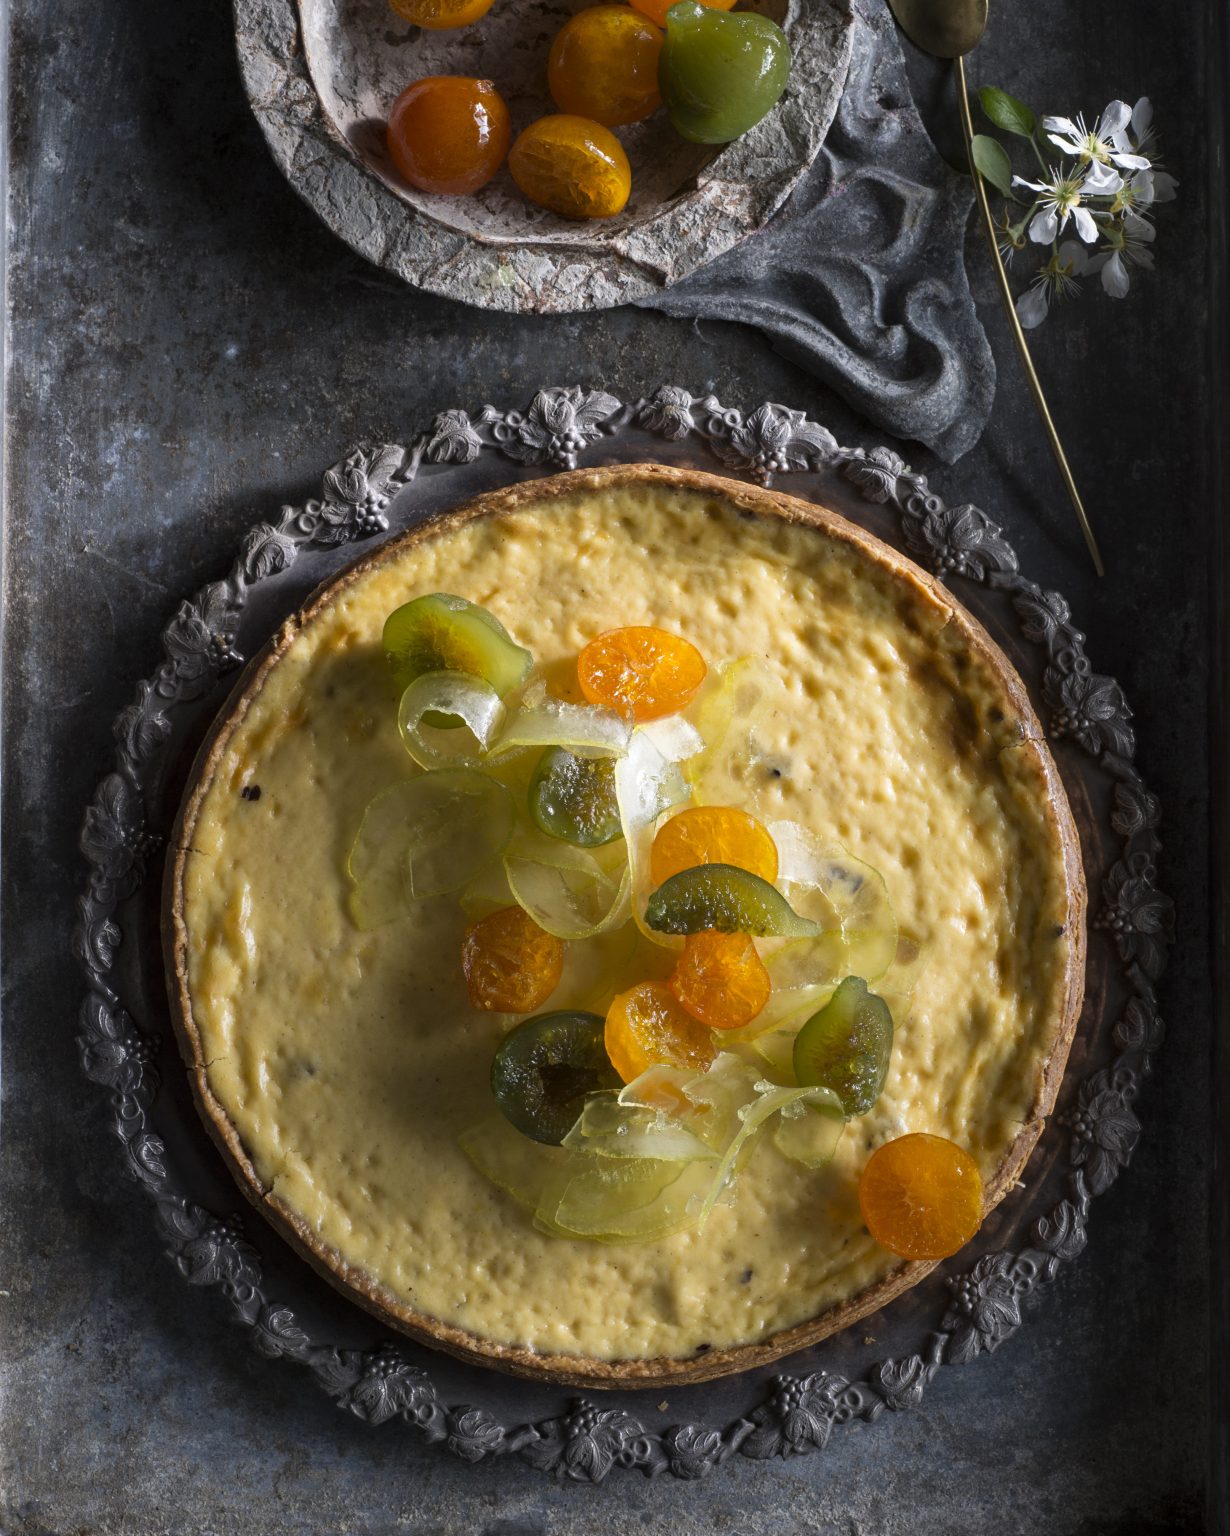 Italian Easter tart: A traditional sweet delight for the holiday